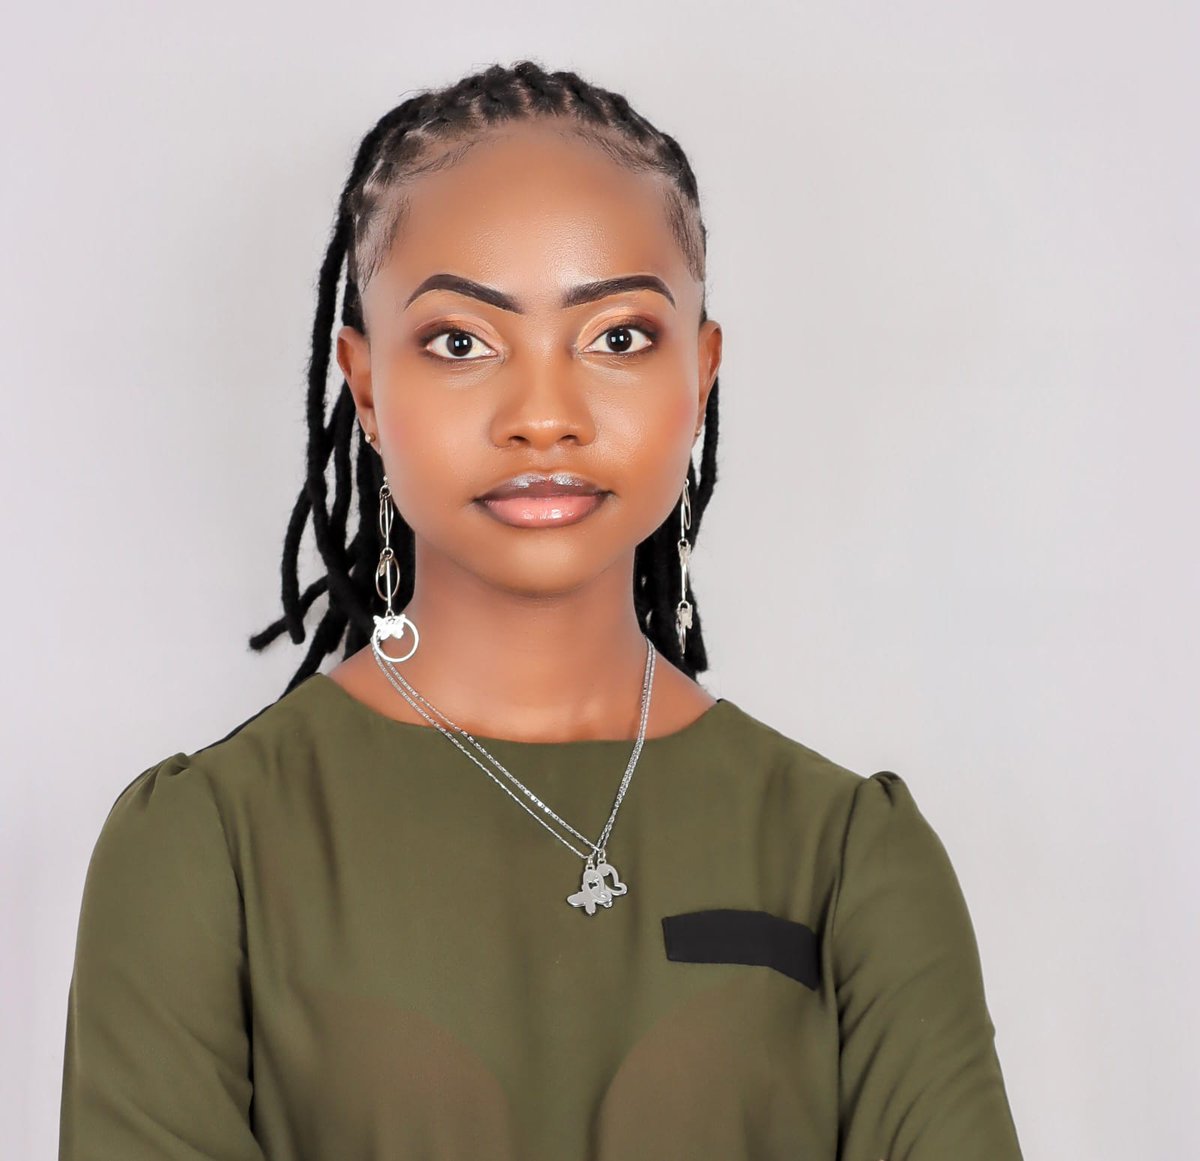 🚨#WeTheYoungPeople🚨👫🇰🇪 Thrilled to announce Ms. Marion Wachia as our new Program Coordinator! 🚀 With her outstanding leadership skills and diverse expertise, she's set to elevate our forum's programs to new heights✨️. Congratulations and welcome on board🎊 #UnescoYouthKe